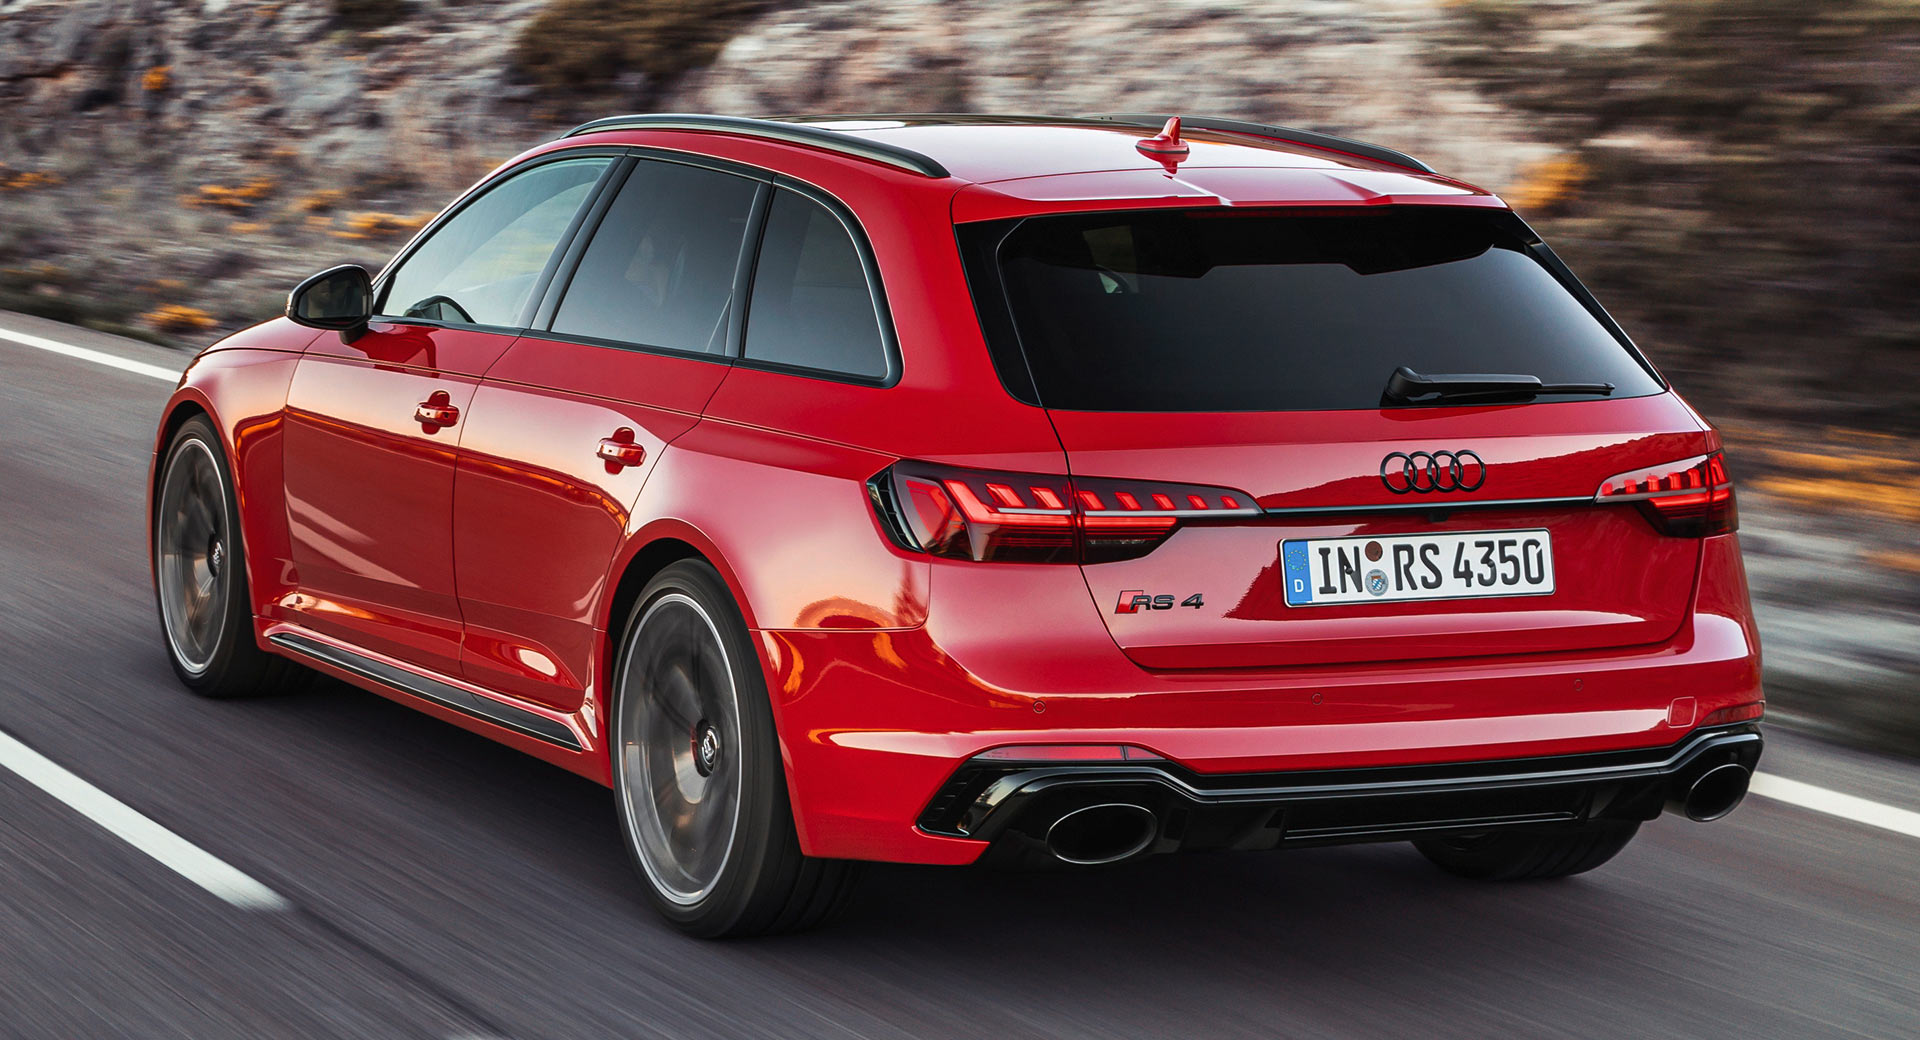 Facelifted 2020 Audi Rs4 Avant Launches With Its Big